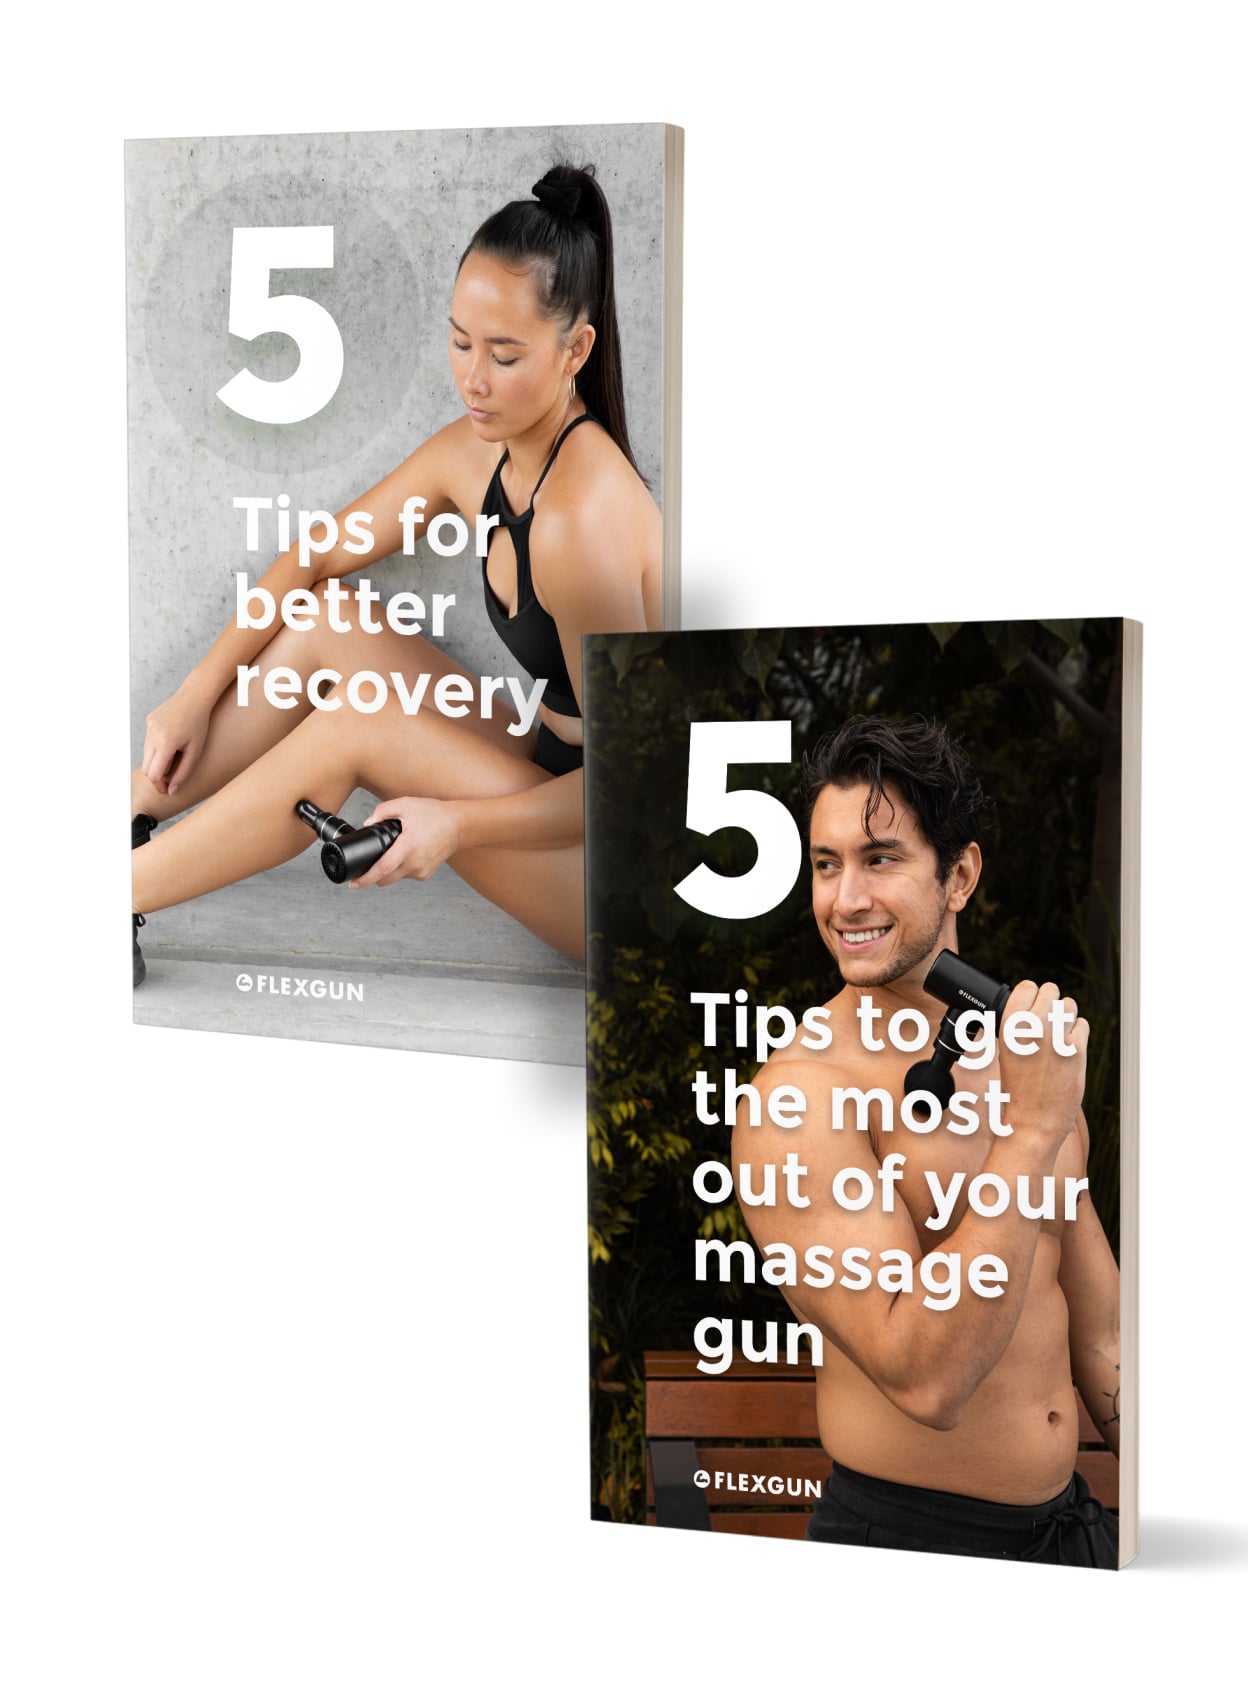 Tips for better recovery and how to use massage gun